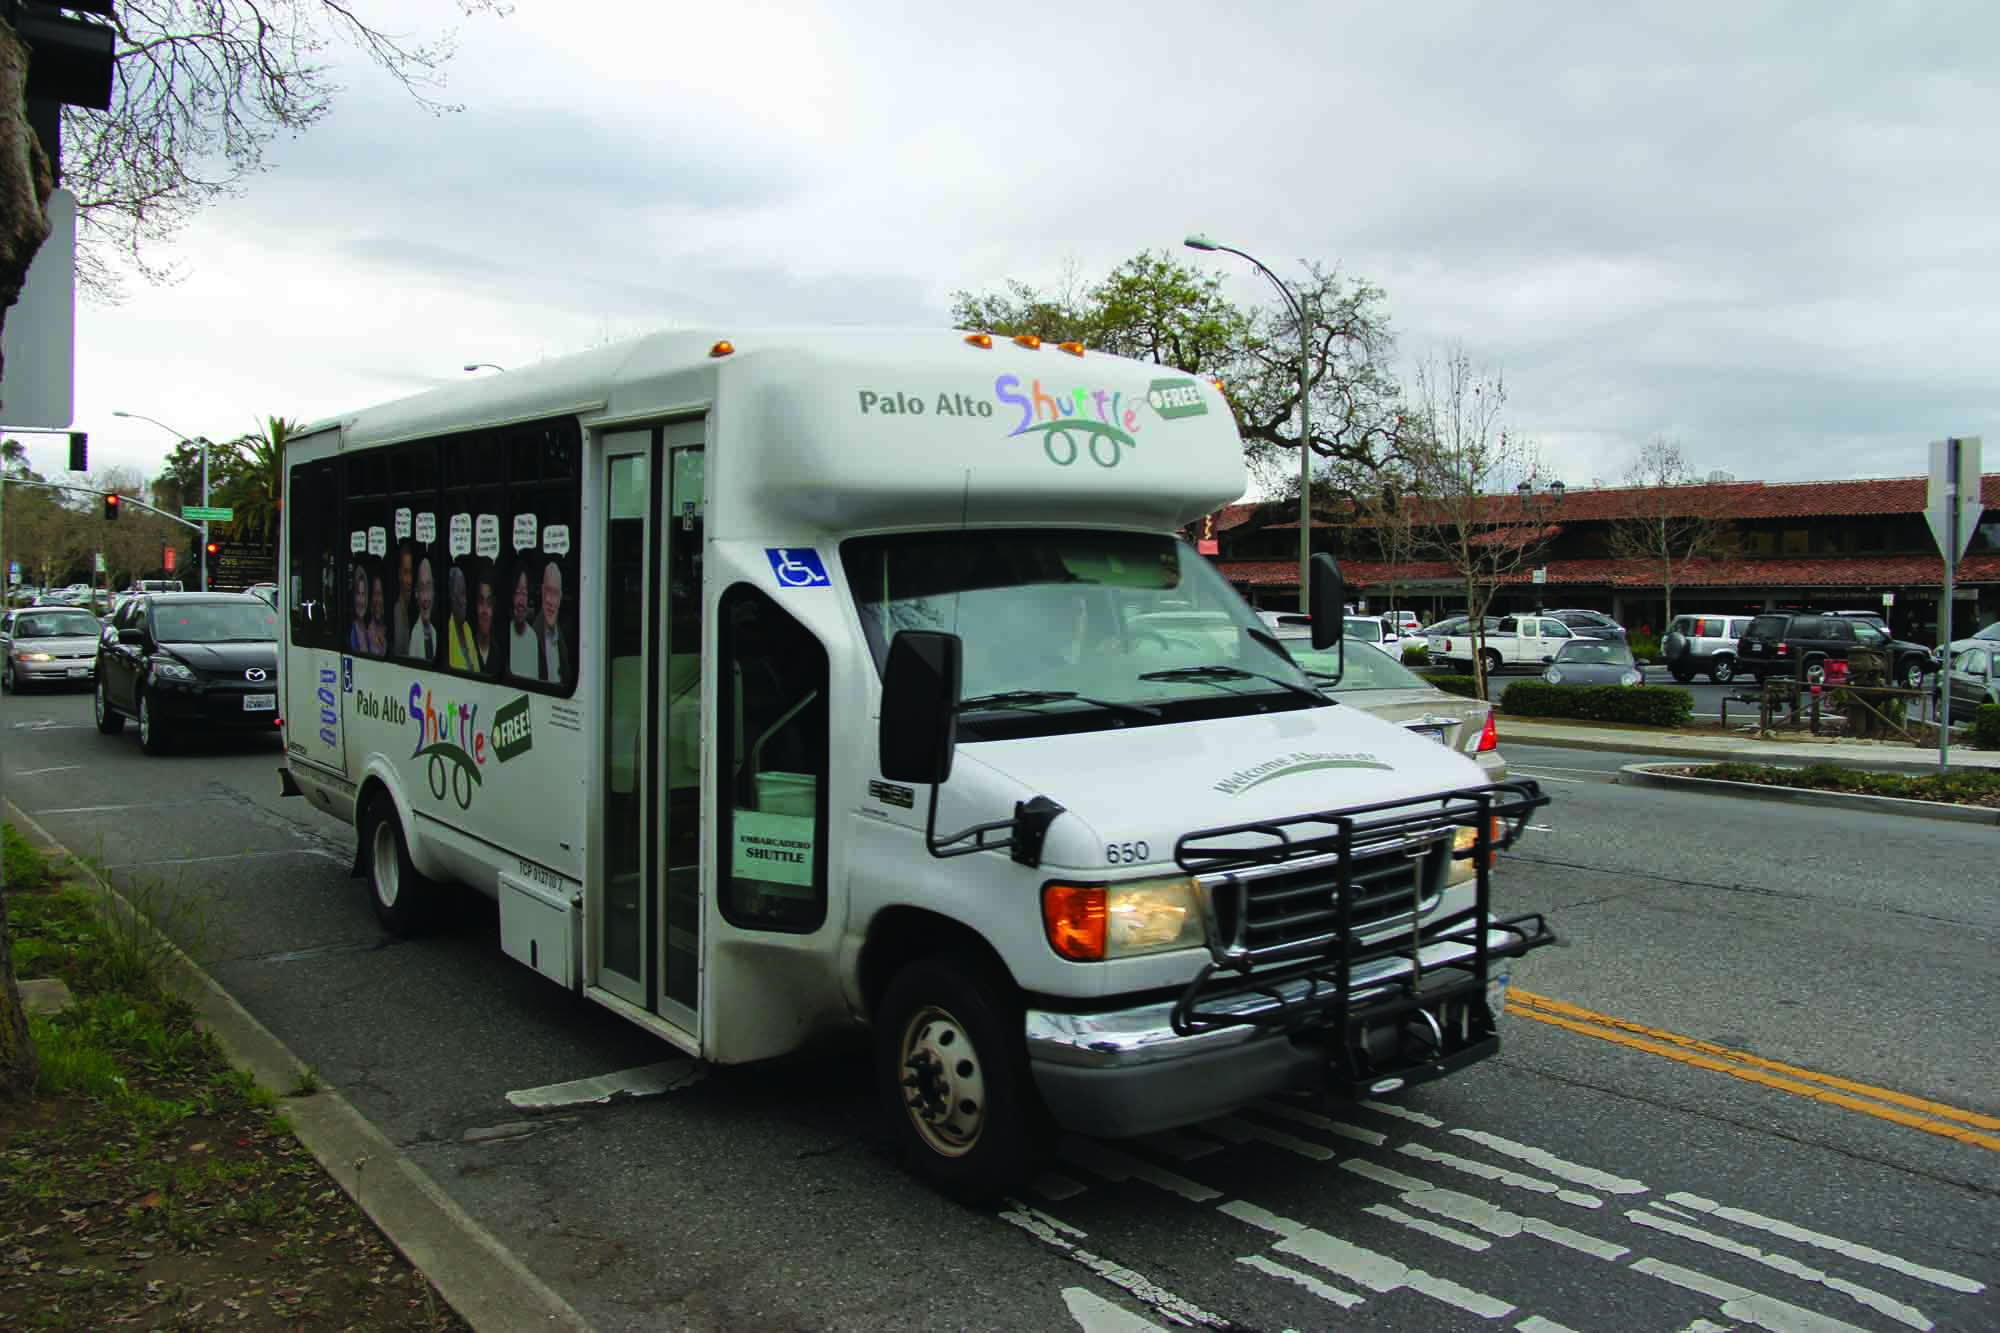 The Palo Alto shuttle program will triple its service and add new routes around the city.